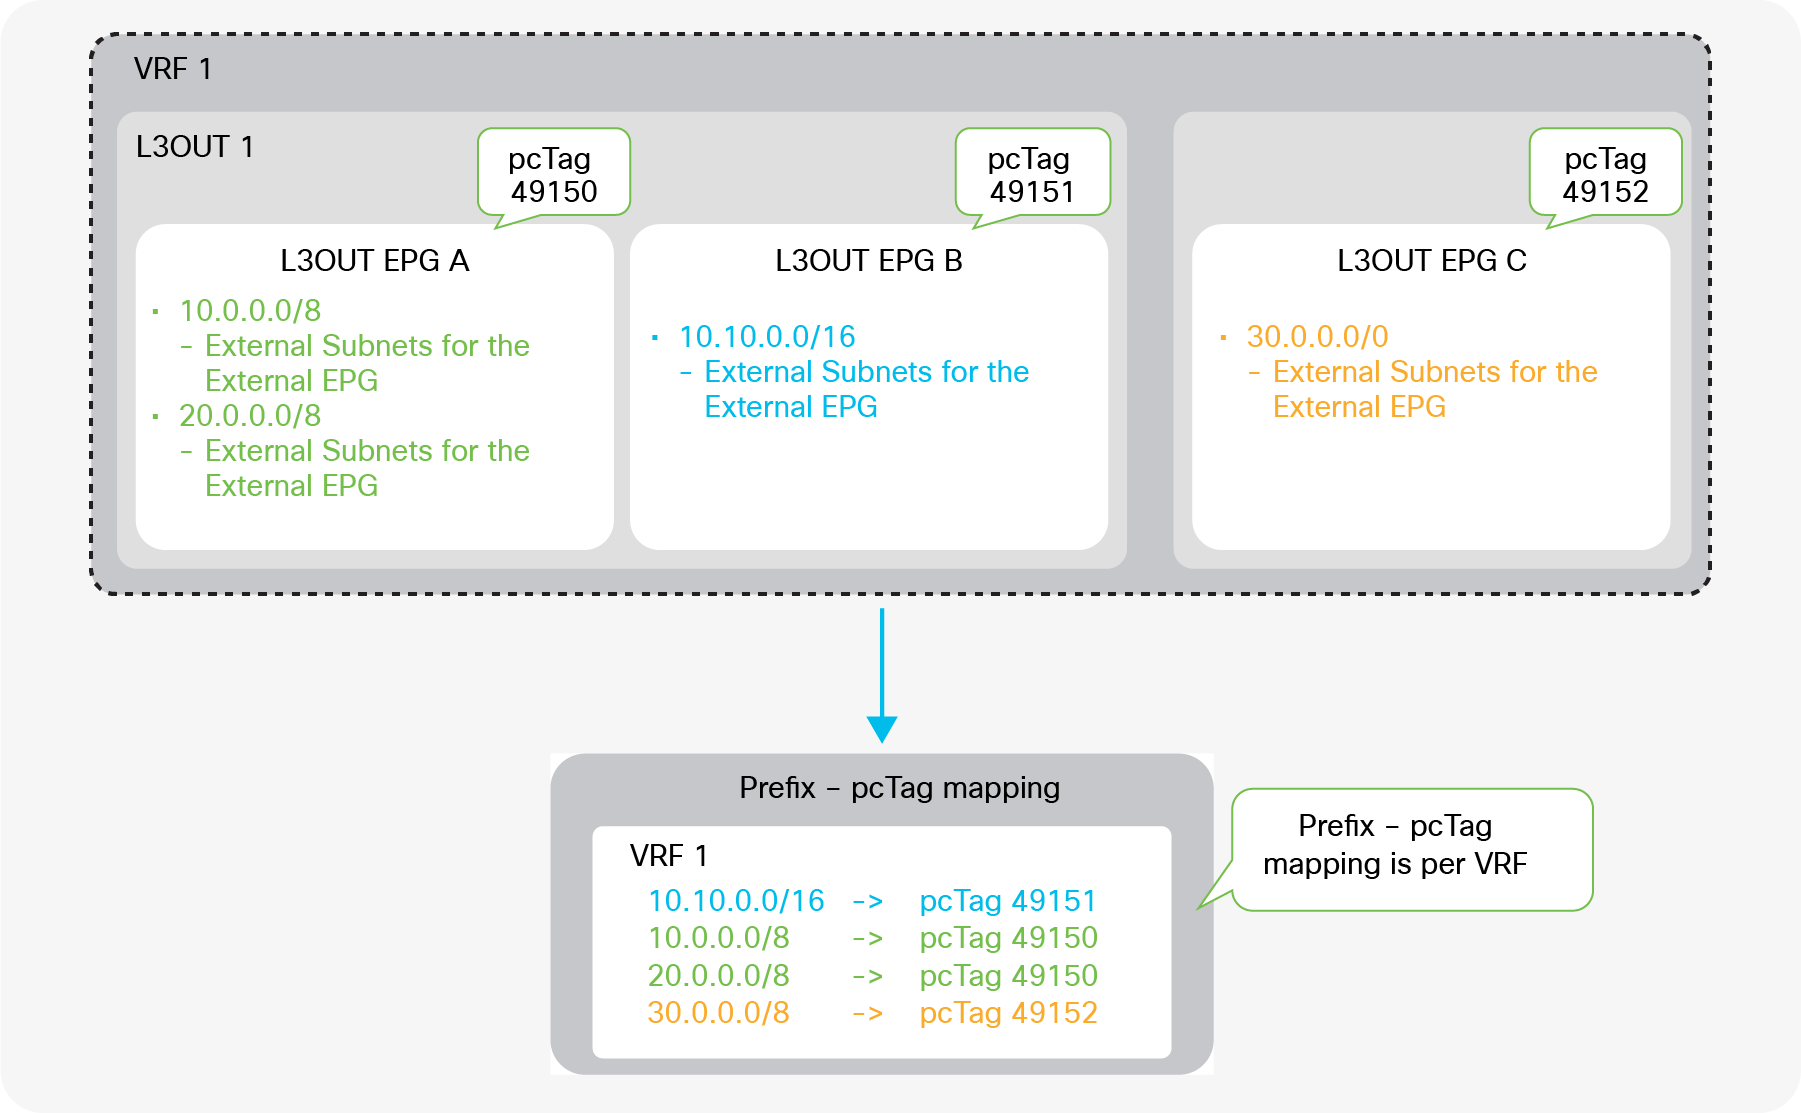 L3Out prefix - pcTag mapping